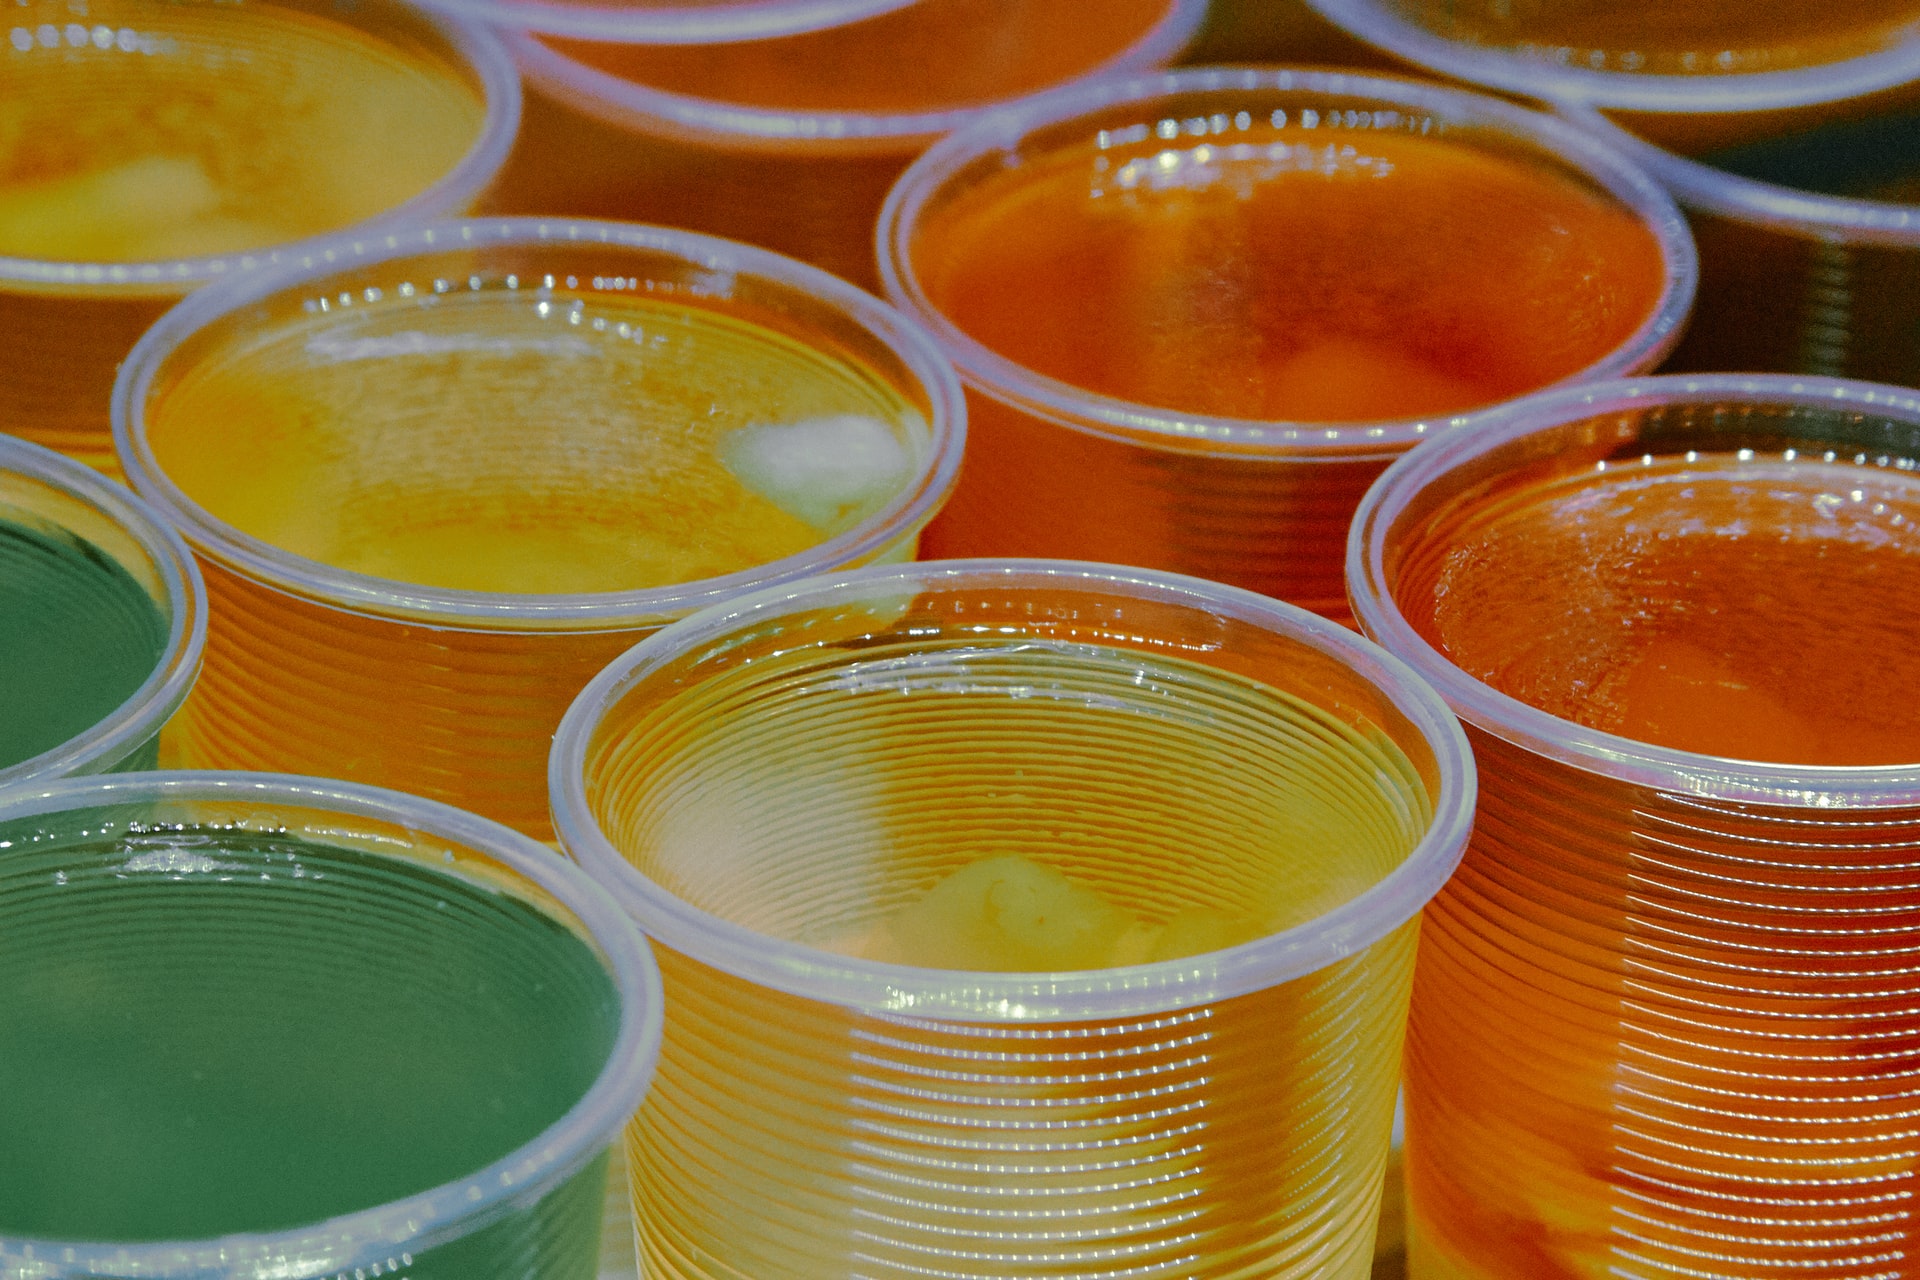 Green, yellow, and orange vodka jello shots lined up next to each other.